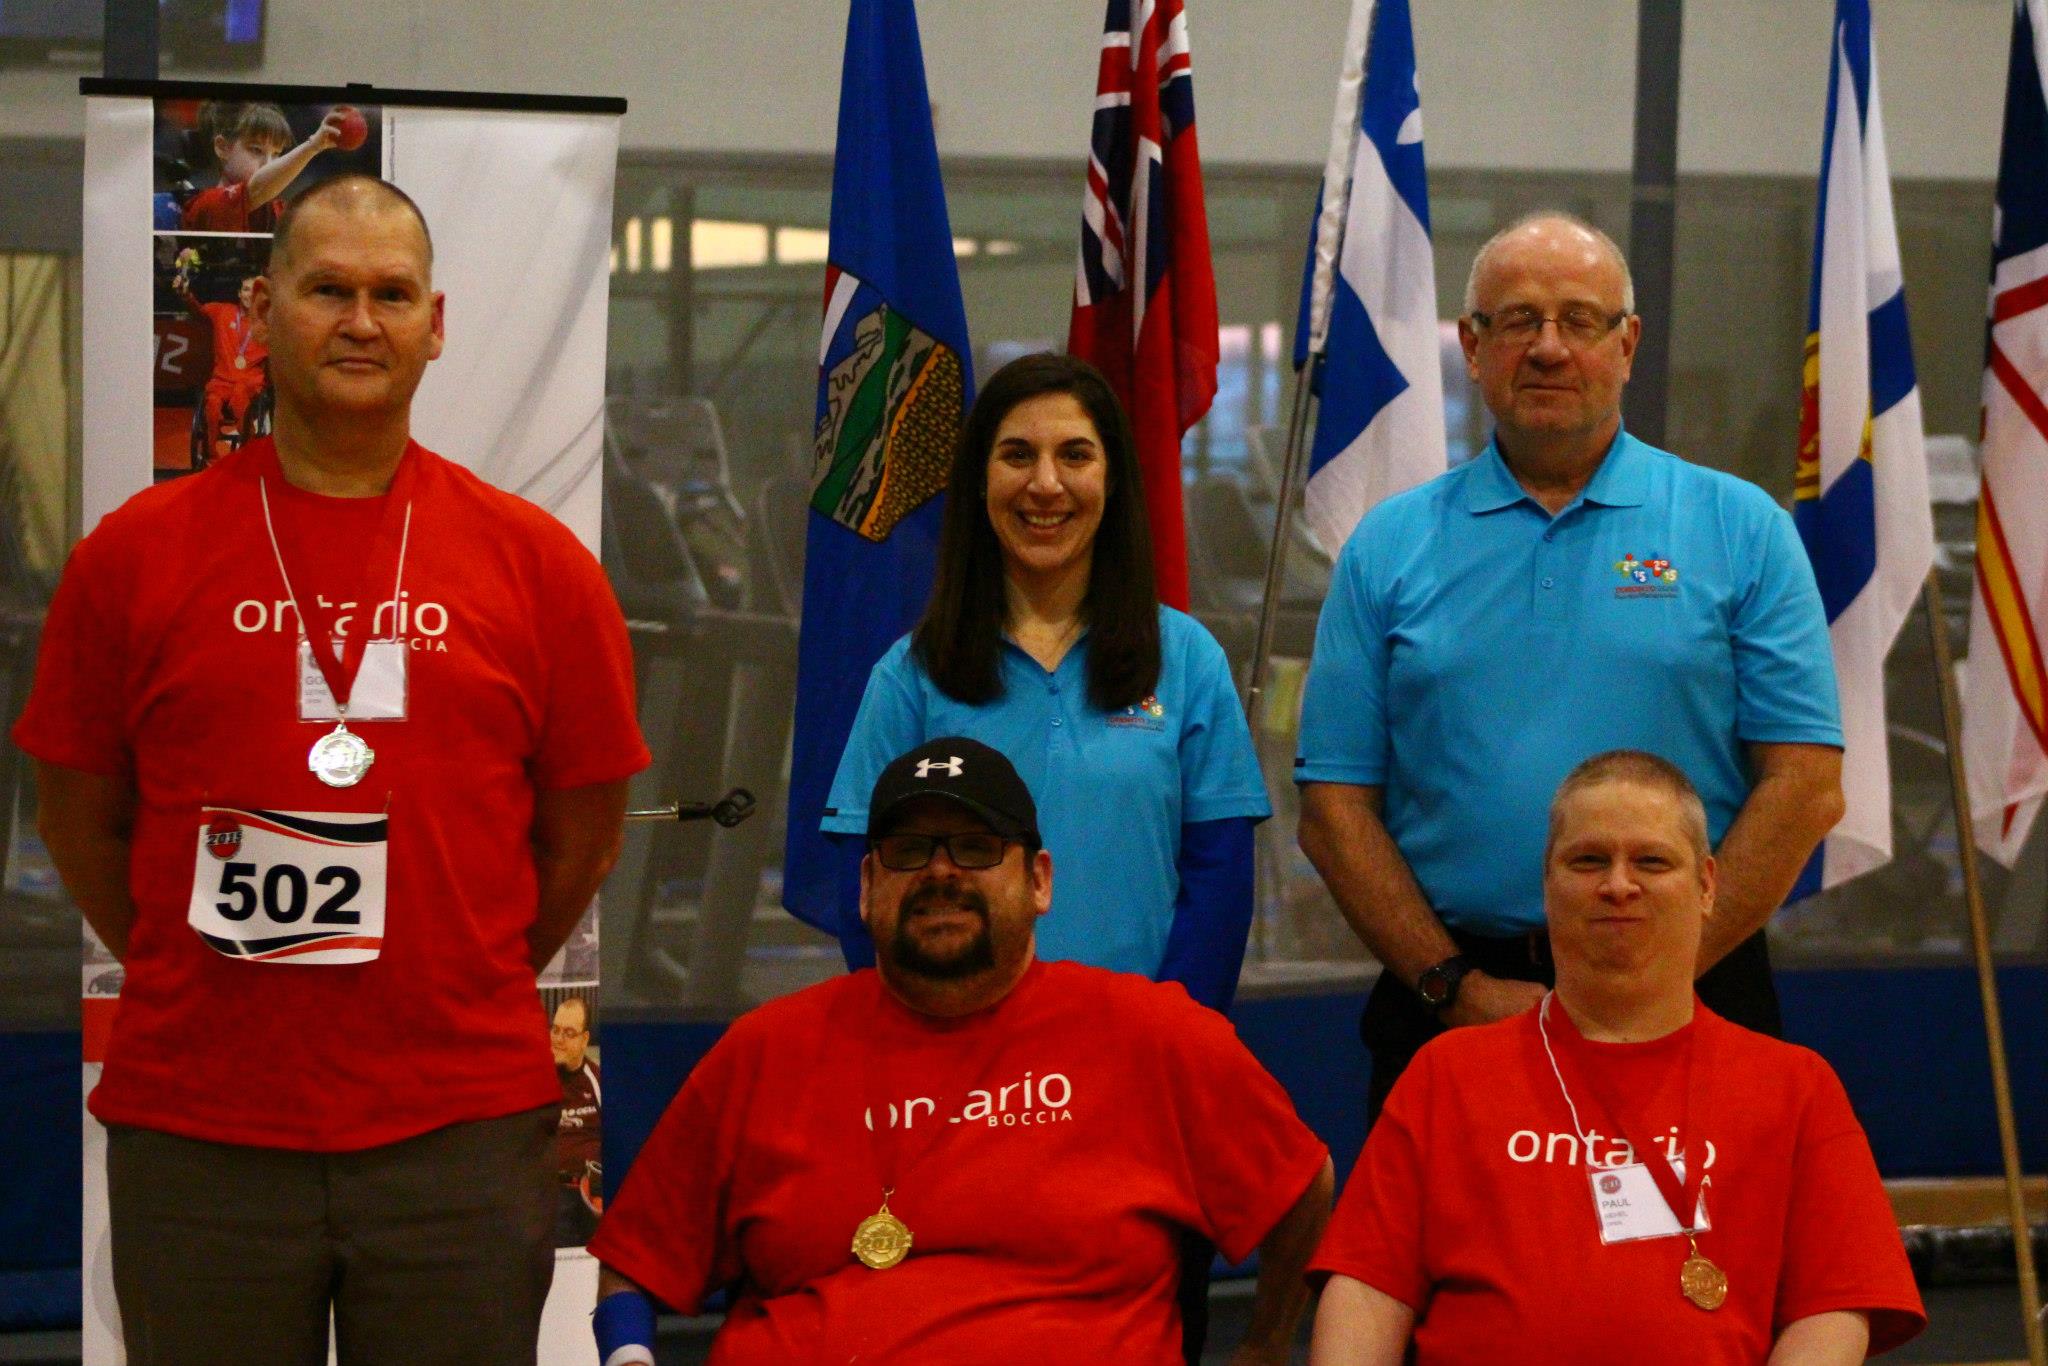 Gio Desero (front row, centre) claimed the gold medal in the open competition ©Canadian Cerebral Palsy Sports Association/Facebook